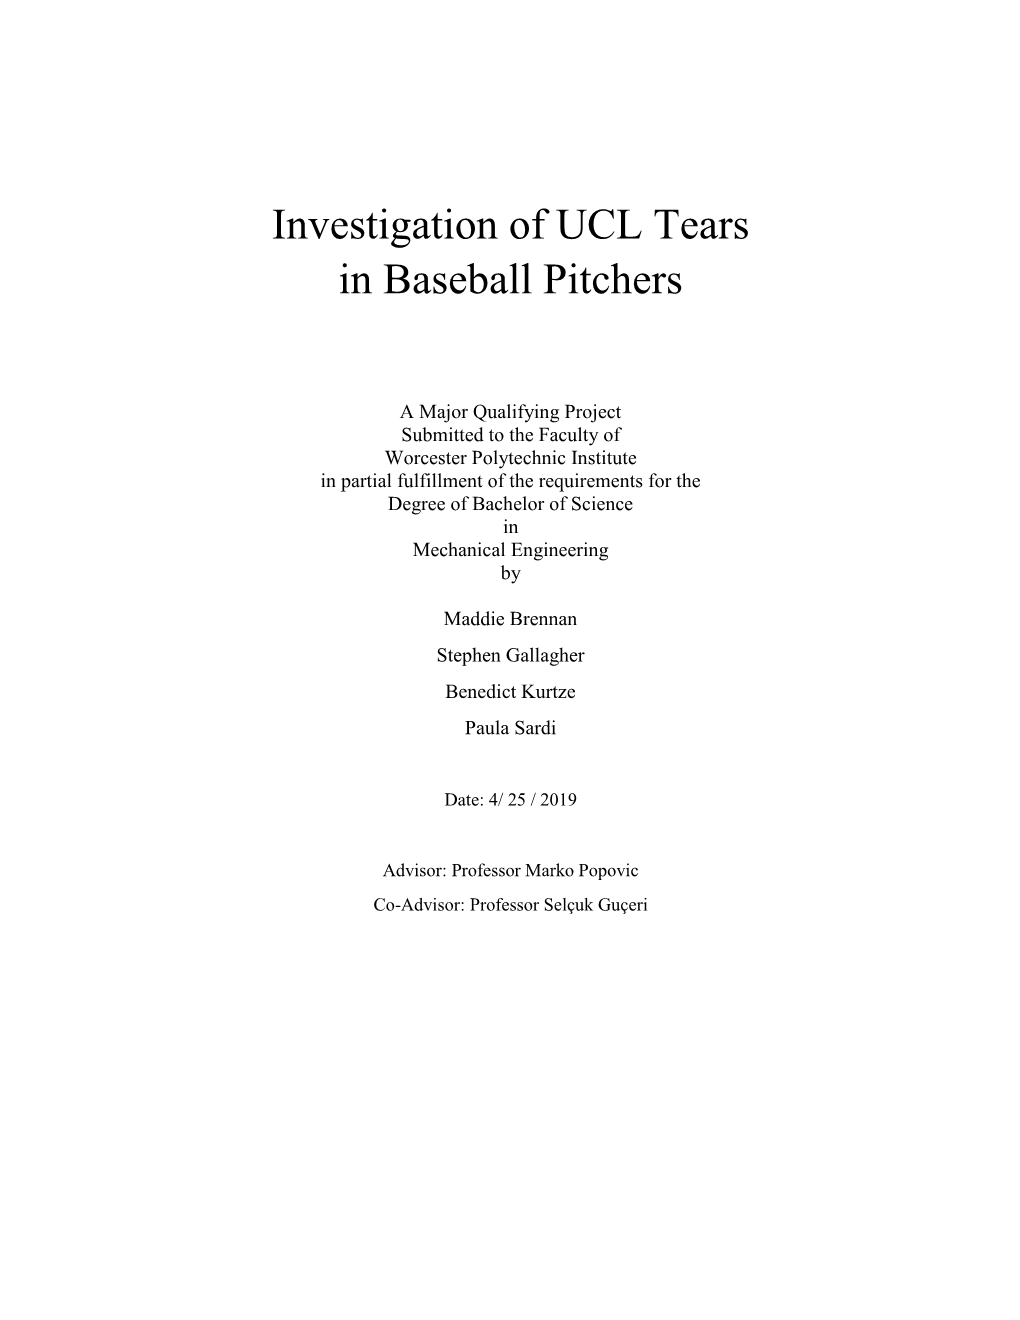 Investigation of UCL Tears in Baseball Pitchers